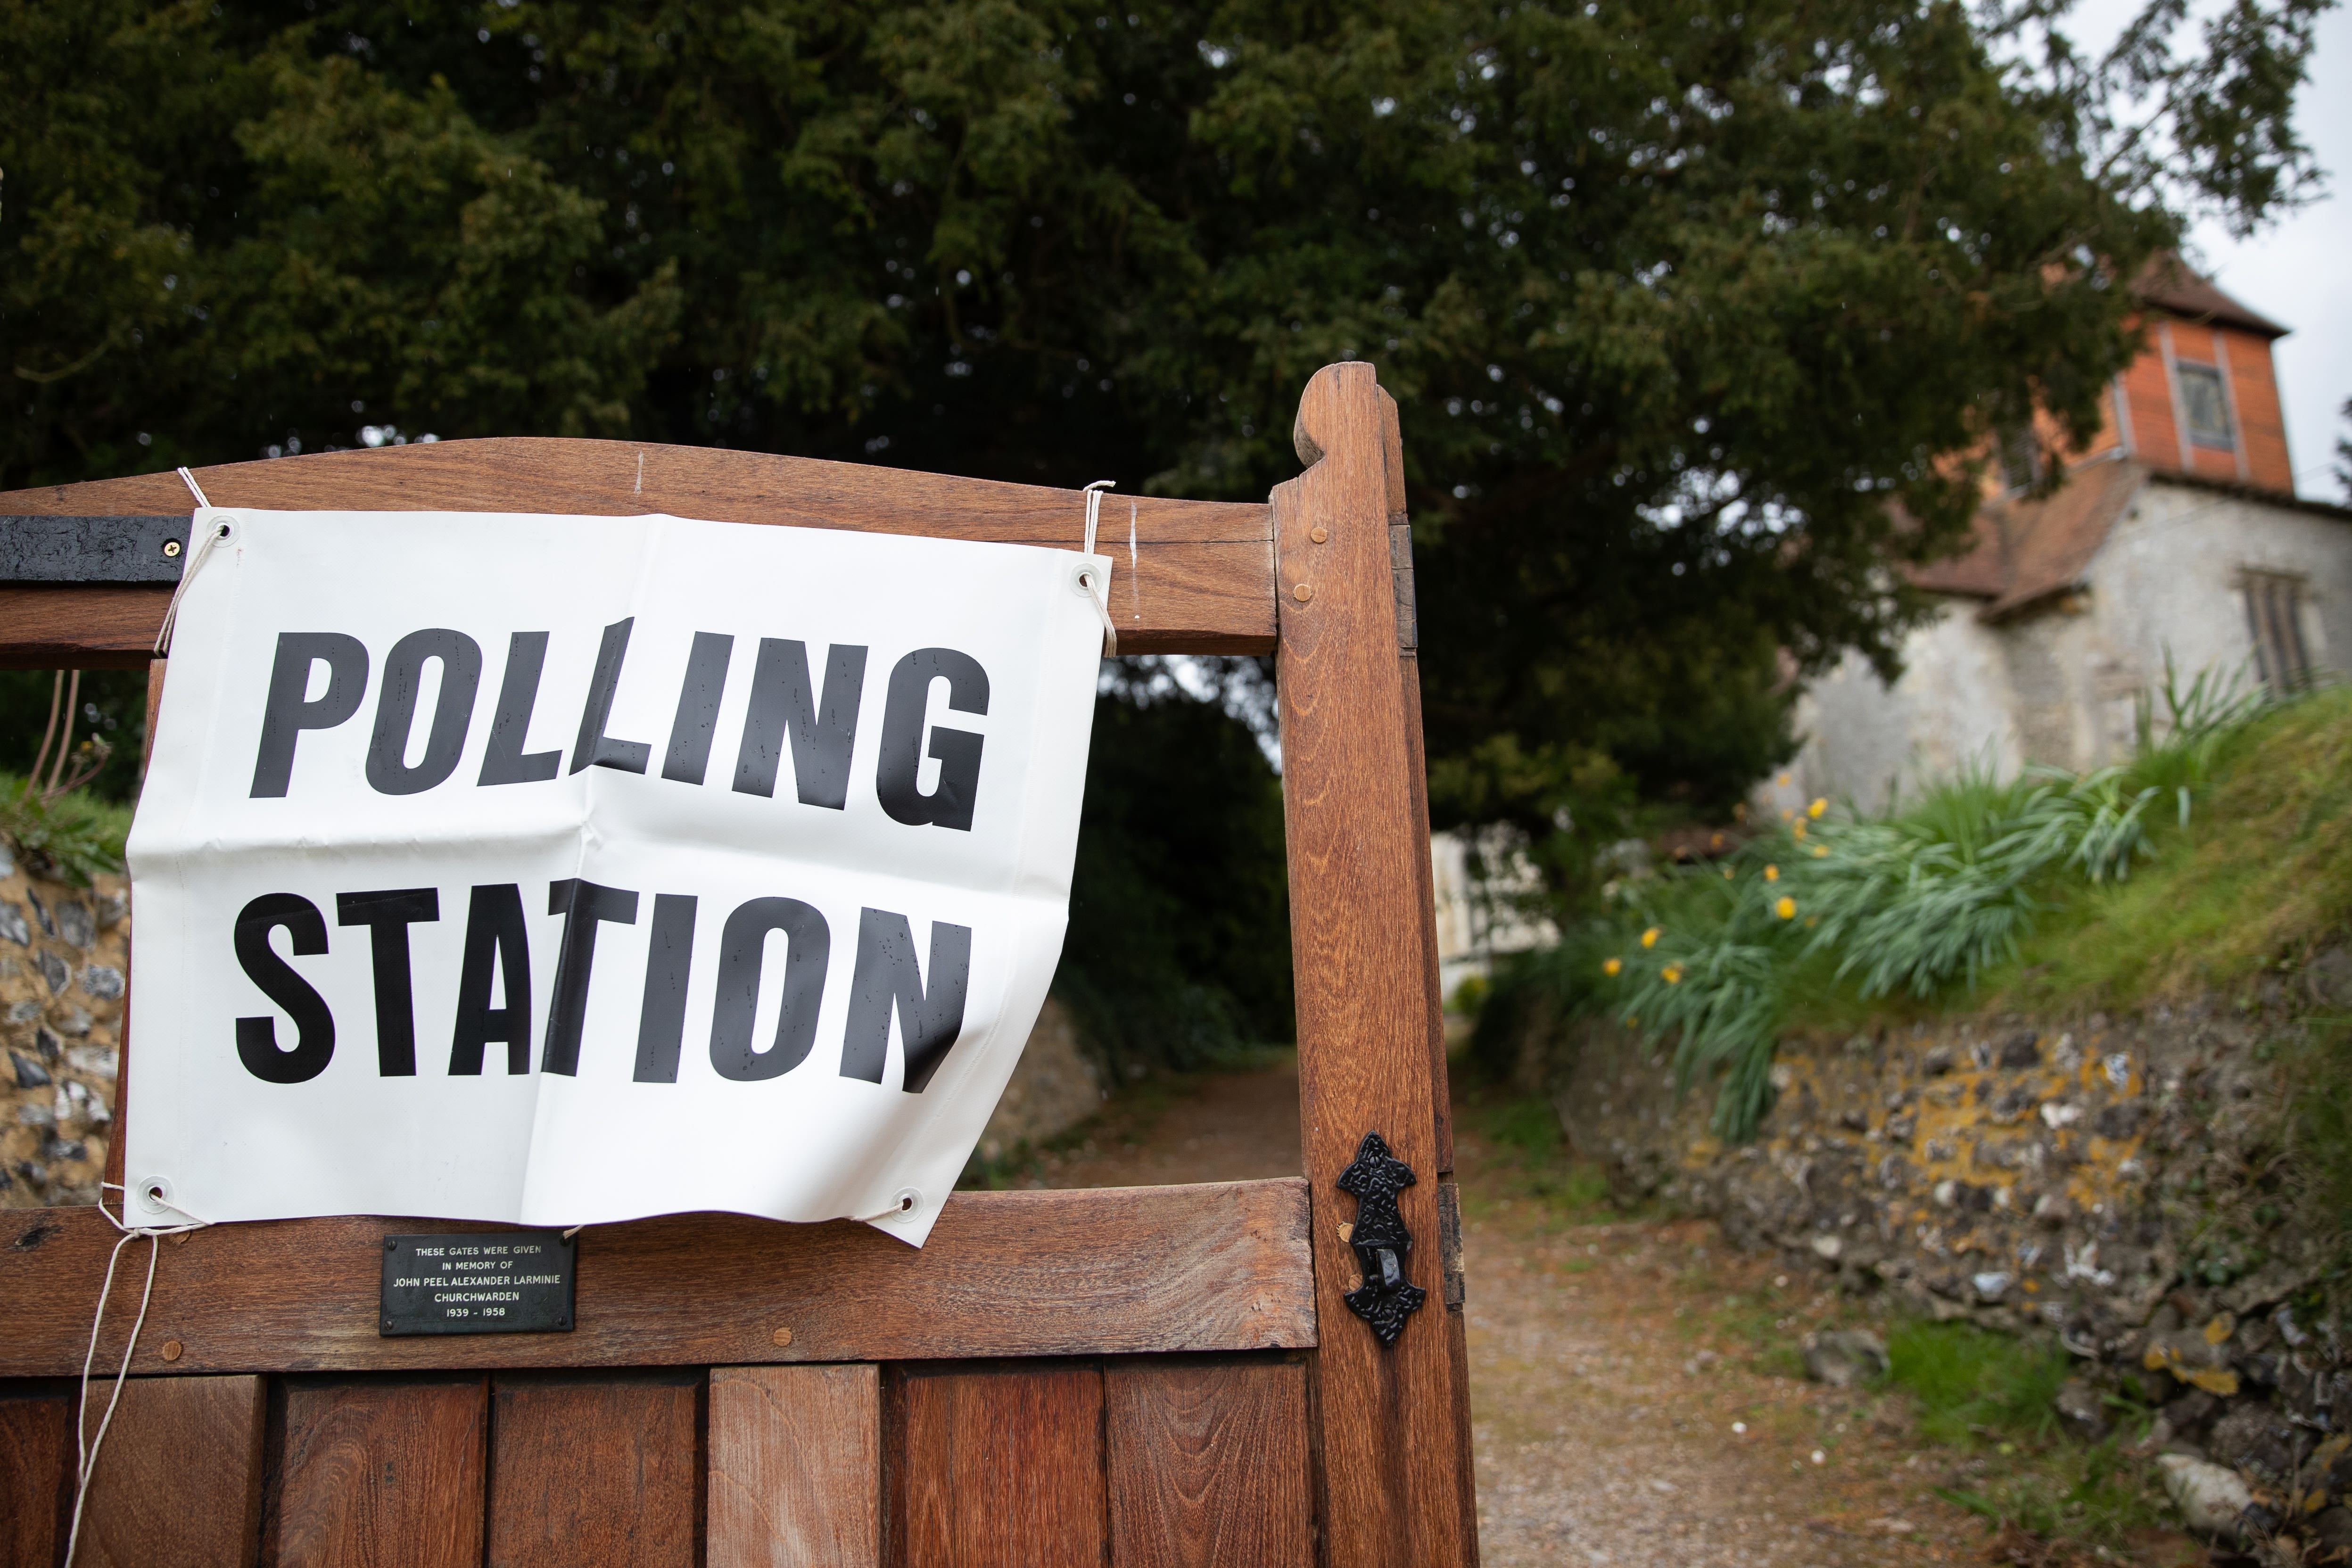 The law’s only practical effect will be to prevent people voting who ought to be entitled to vote